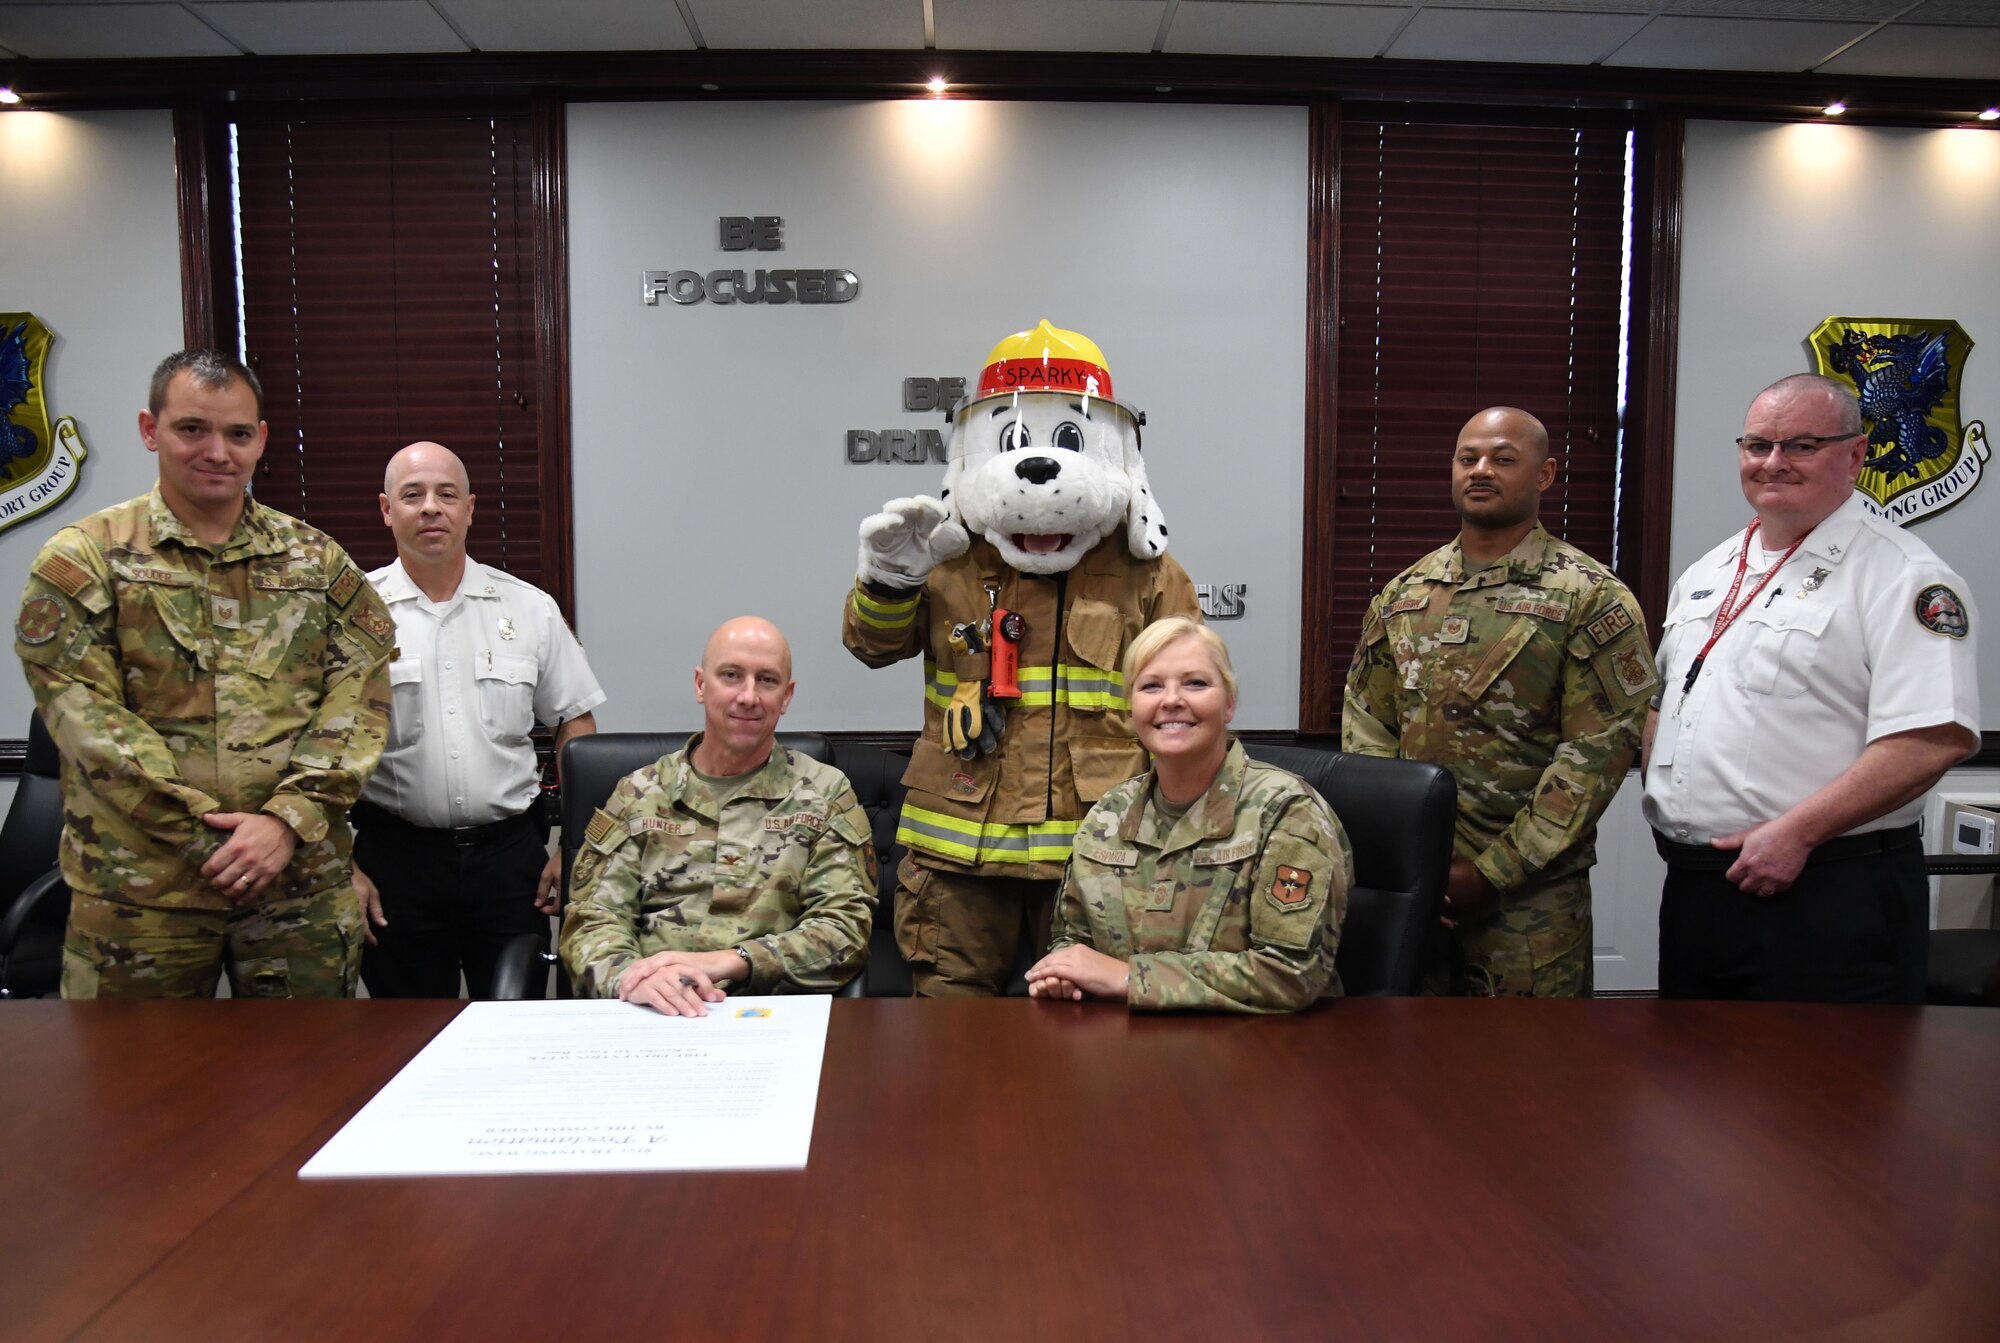 U.S. Air Force Col. William Hunter, 81st Training Wing commander, and Chief Master Sgt. Sarah Esparza, 81st TRW command chief, pose for a photo with members of the Keesler Fire Department after signing the Fire Prevention Week proclamation inside the 81st TRW headquarters building at Keesler Air Force Base, Mississippi, Oct. 4, 2022. The week-long event, Oct. 9-15, includes fire drills, literature hand-outs and visits from Sparky around the base. (U.S. Air Force photo by Kemberly Groue)